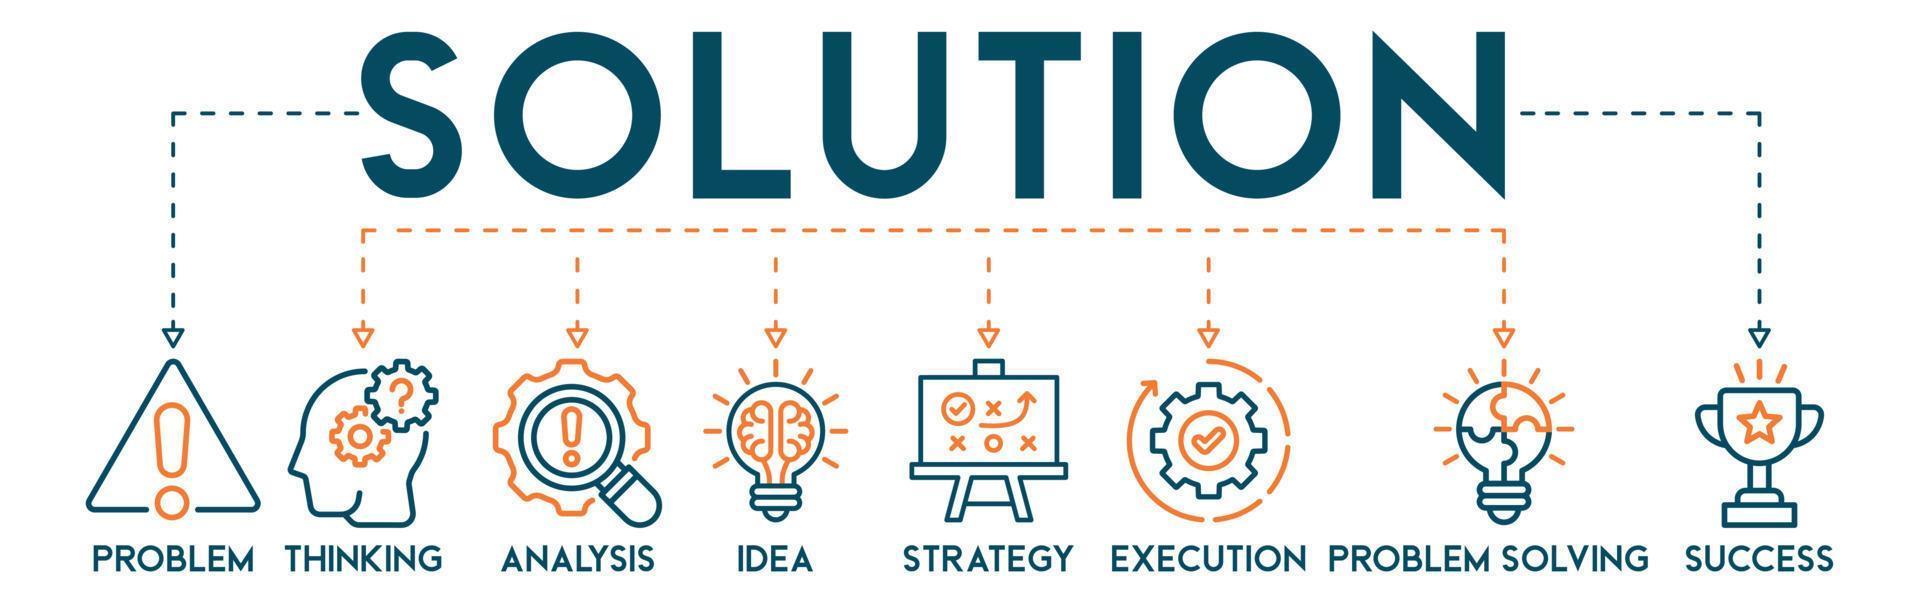 Solution banner web icon vector illustration concept with icons of problem, thinking, analysis, idea, strategy, execution, problem-solving, success